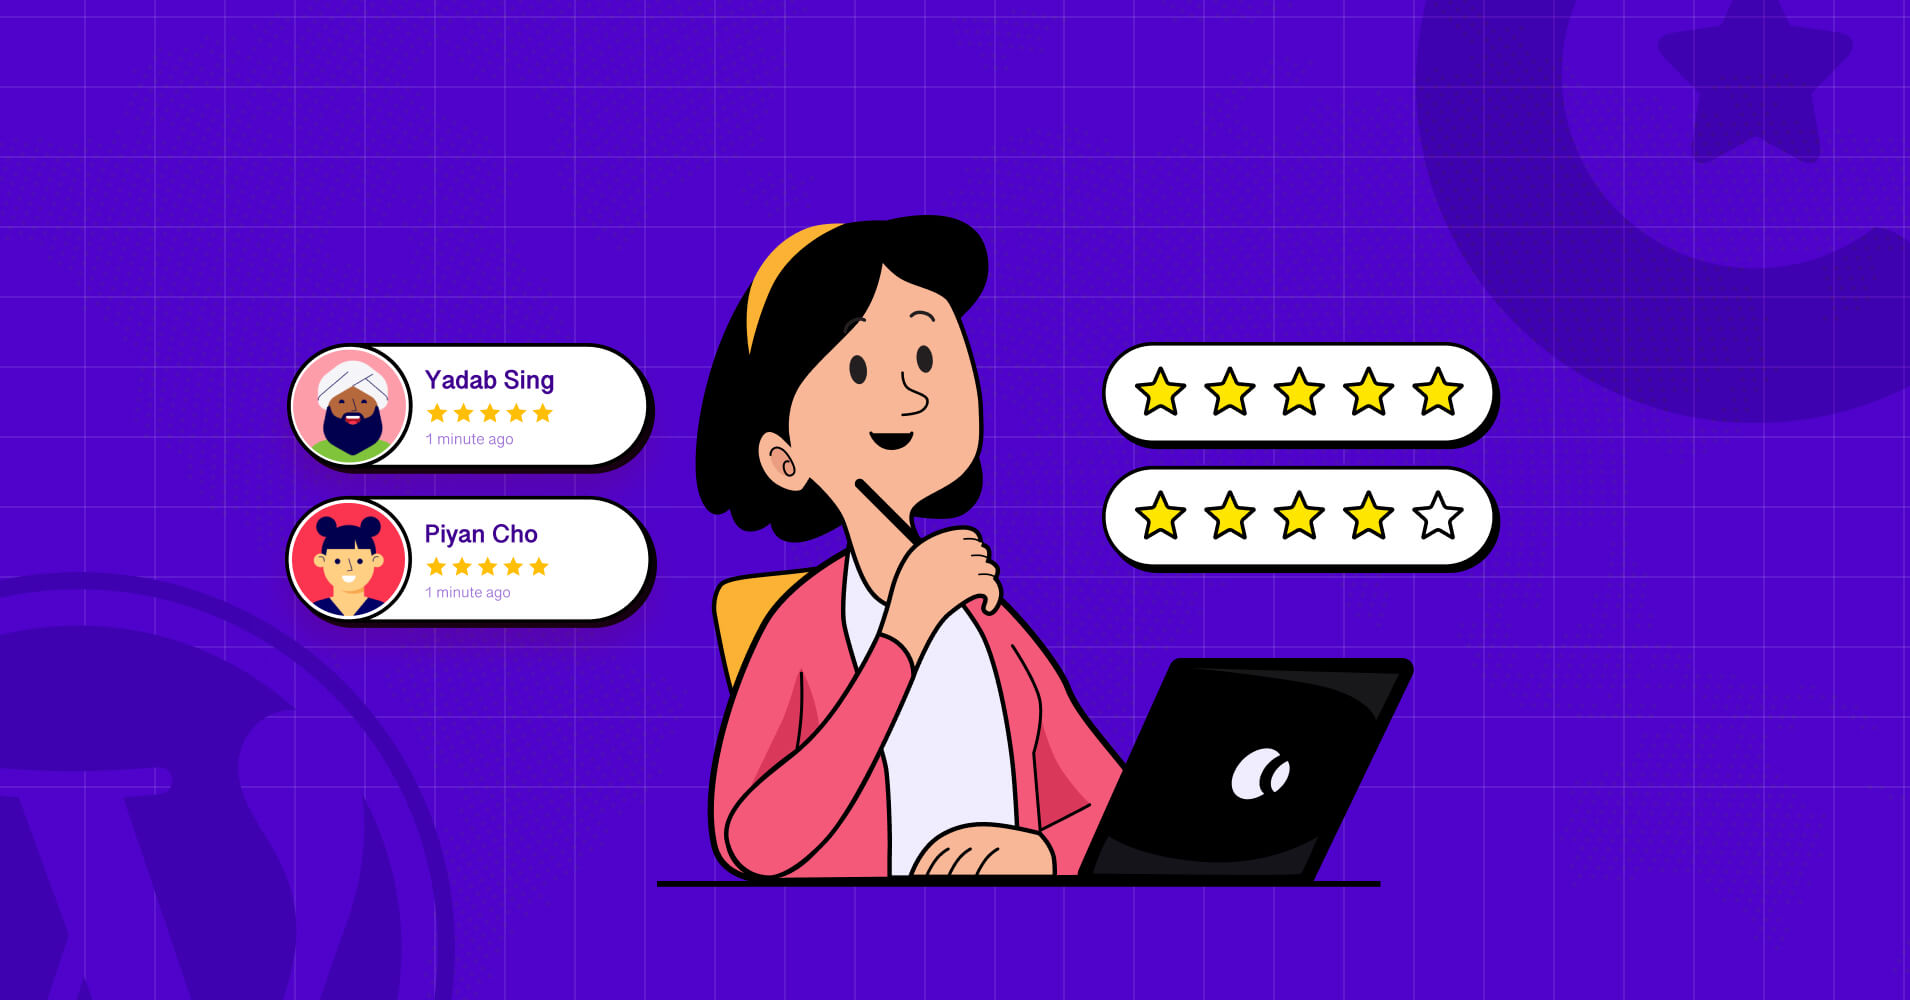 How to get customer feedback is an important topic to discuss for any business to grow.